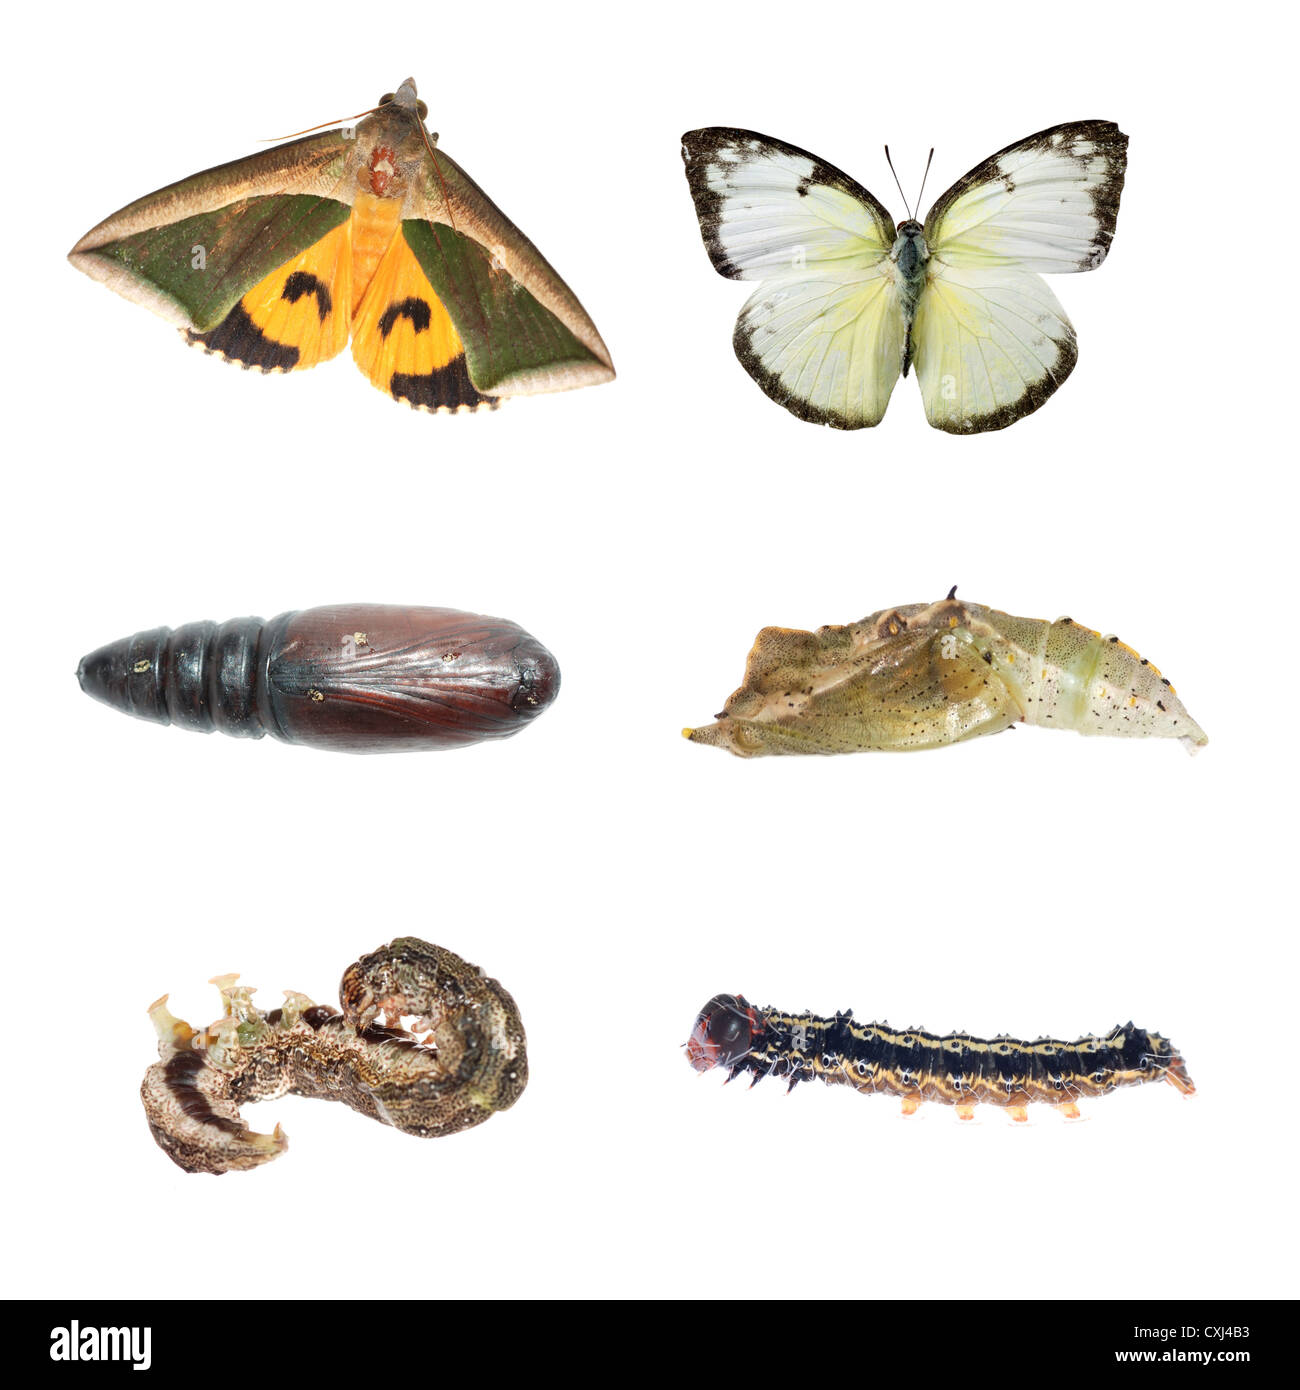 Life Cycle Of The Moth